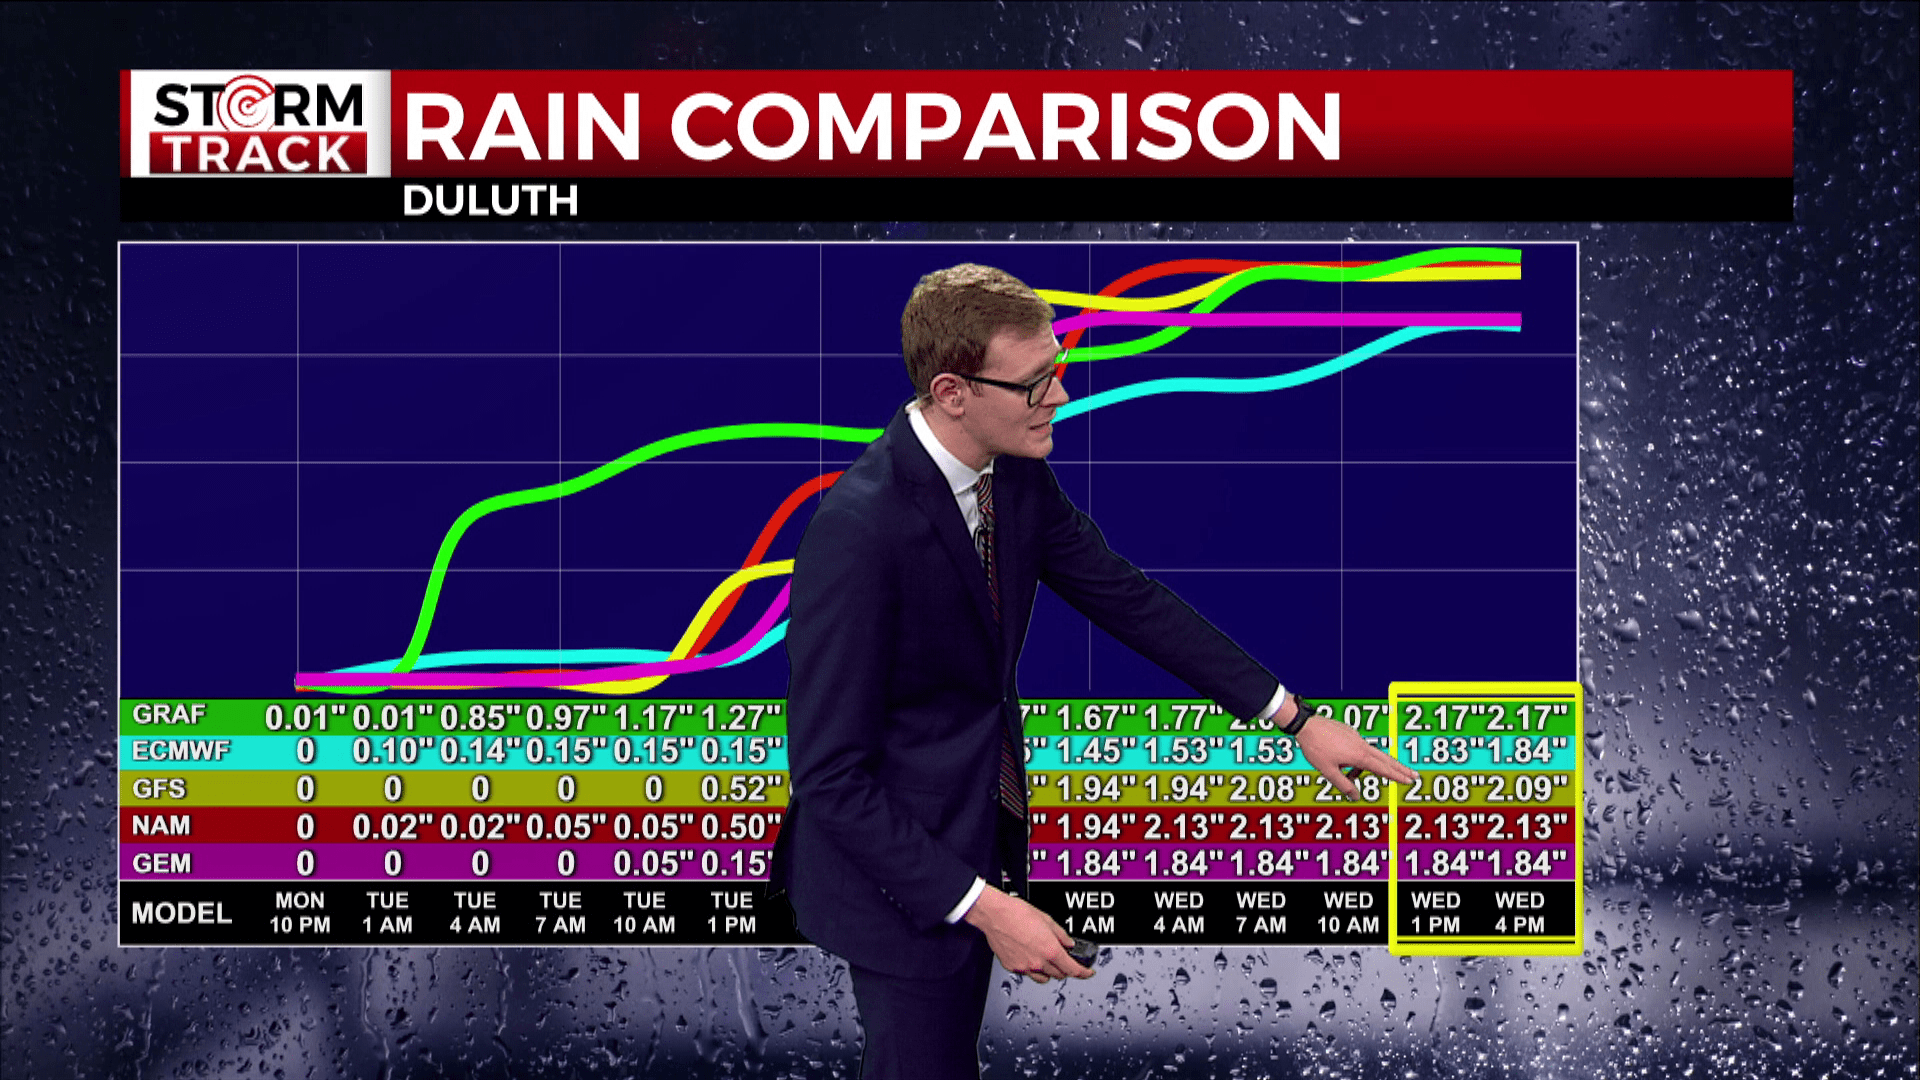 Brandon showing rain accumulation for a variety of forecast models